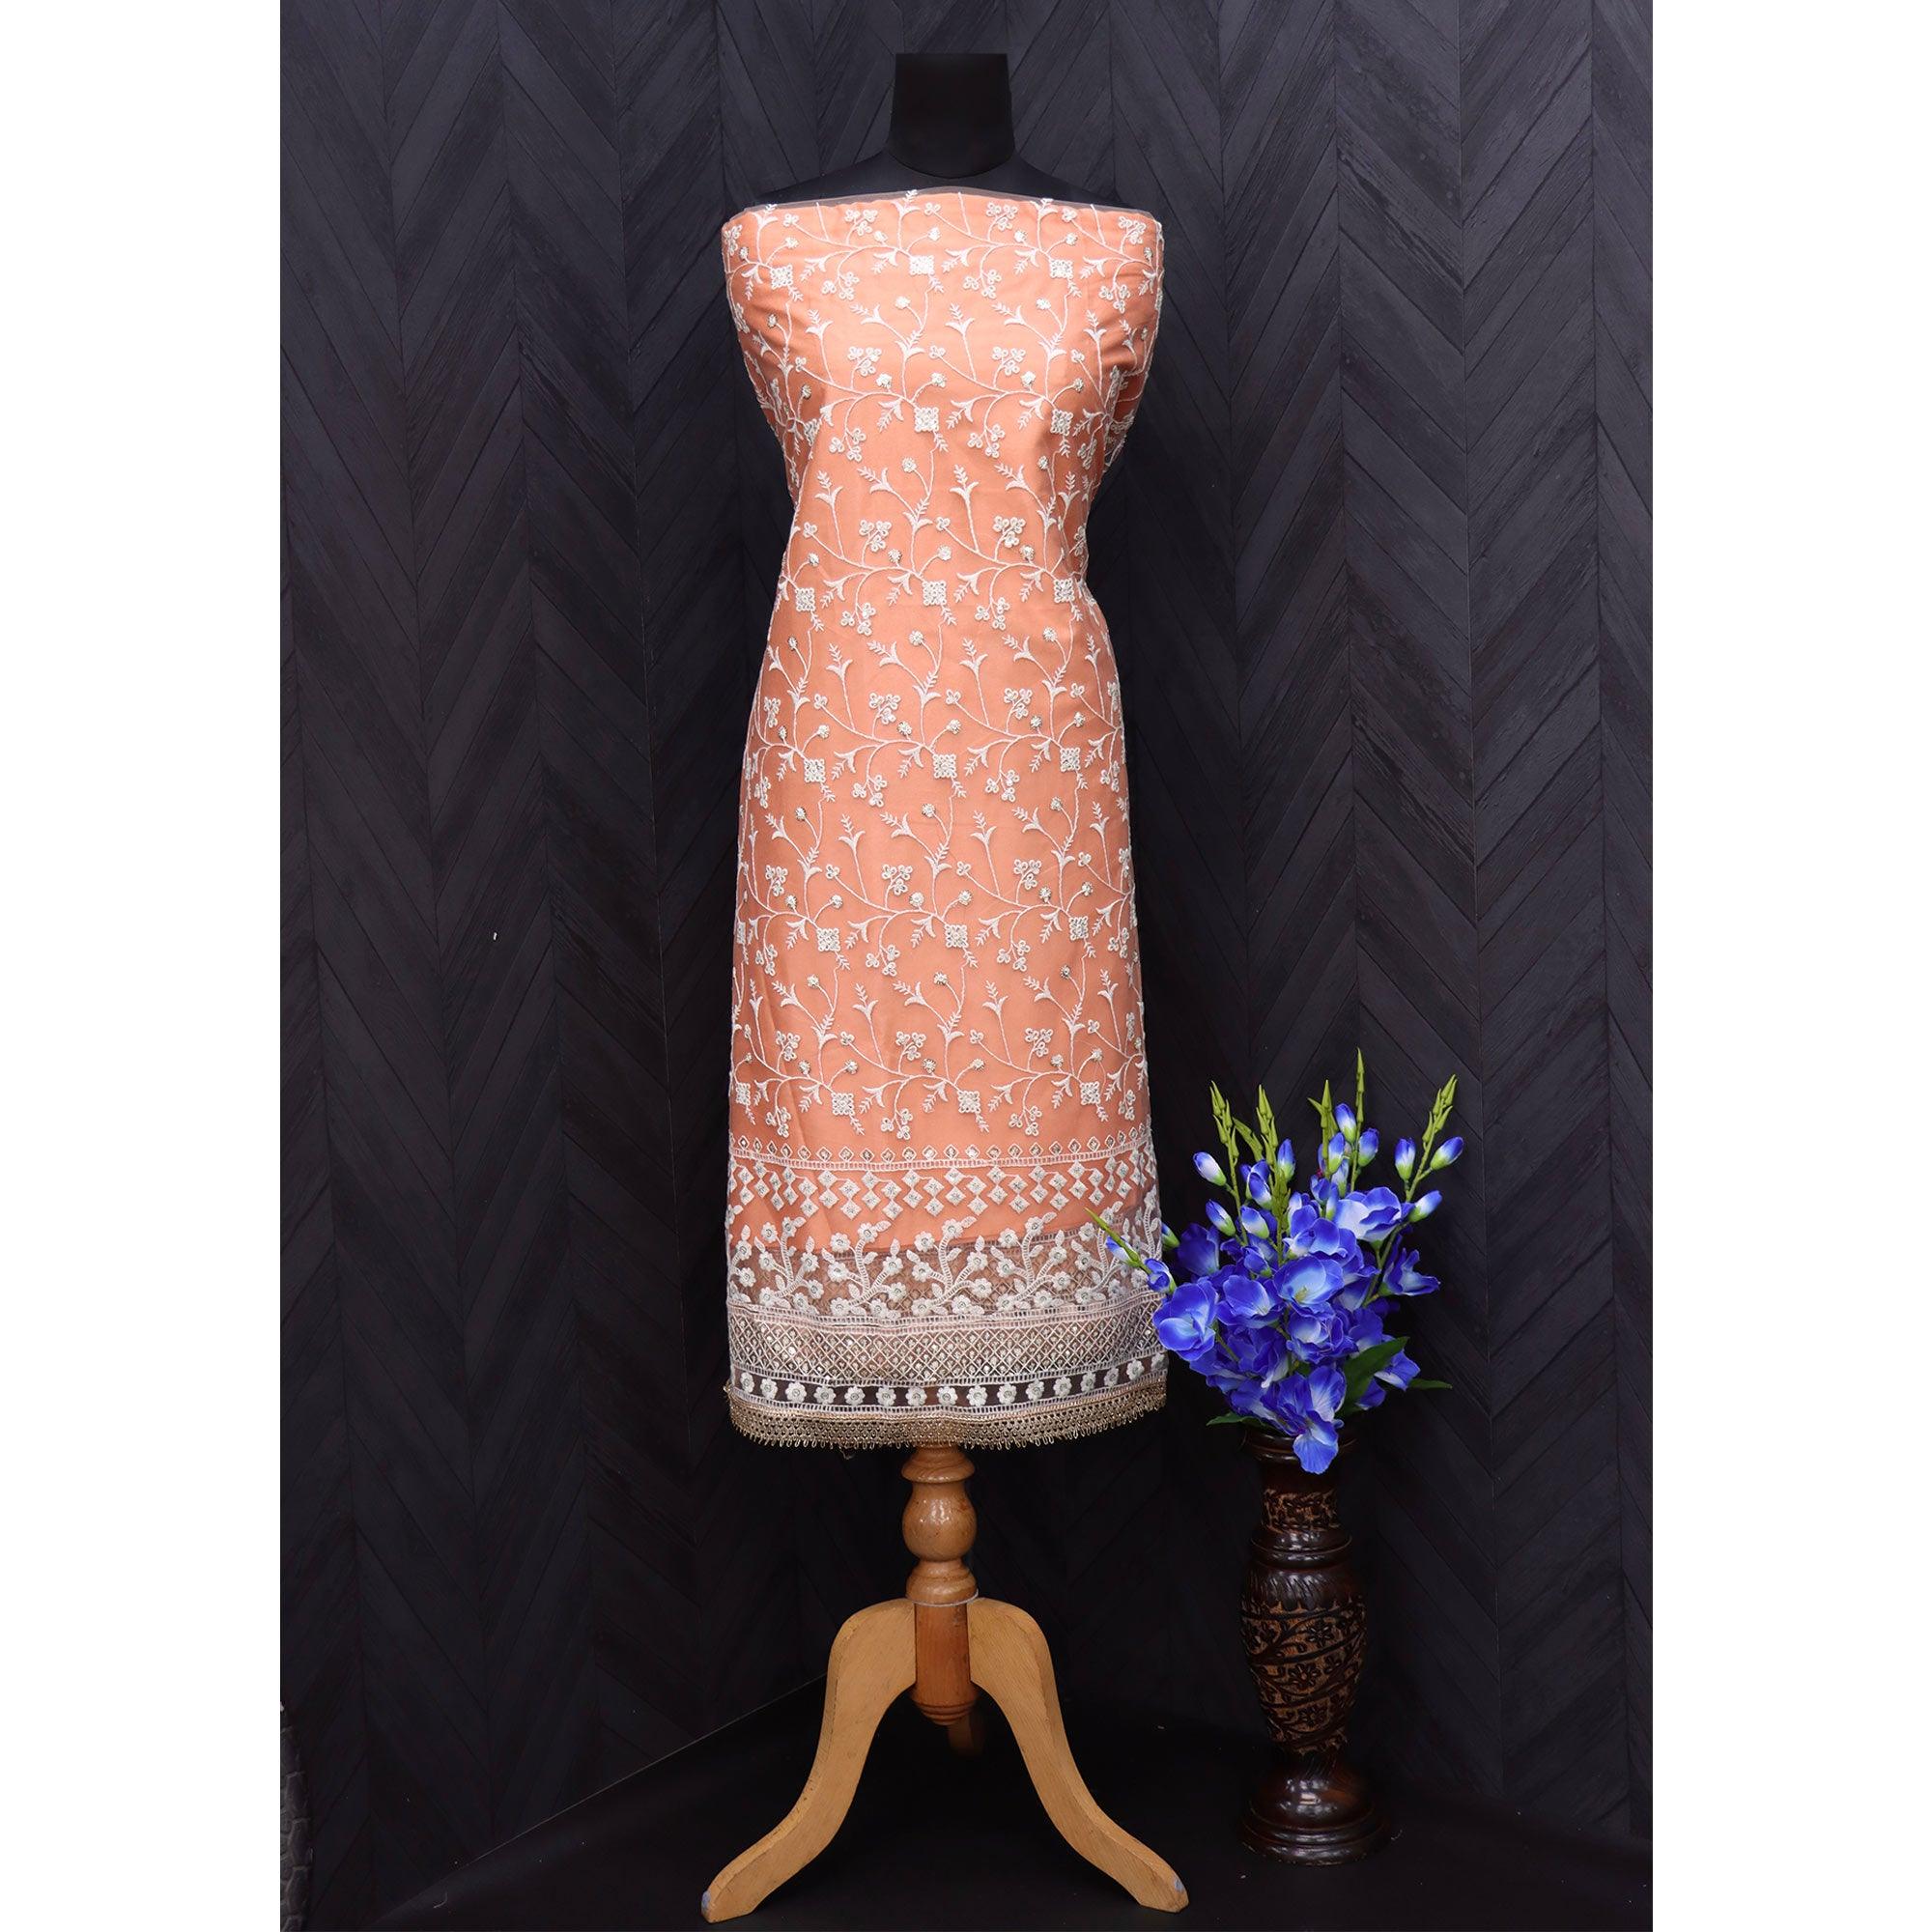 Orange Floral Embroidered Netted Suit - Peachmode